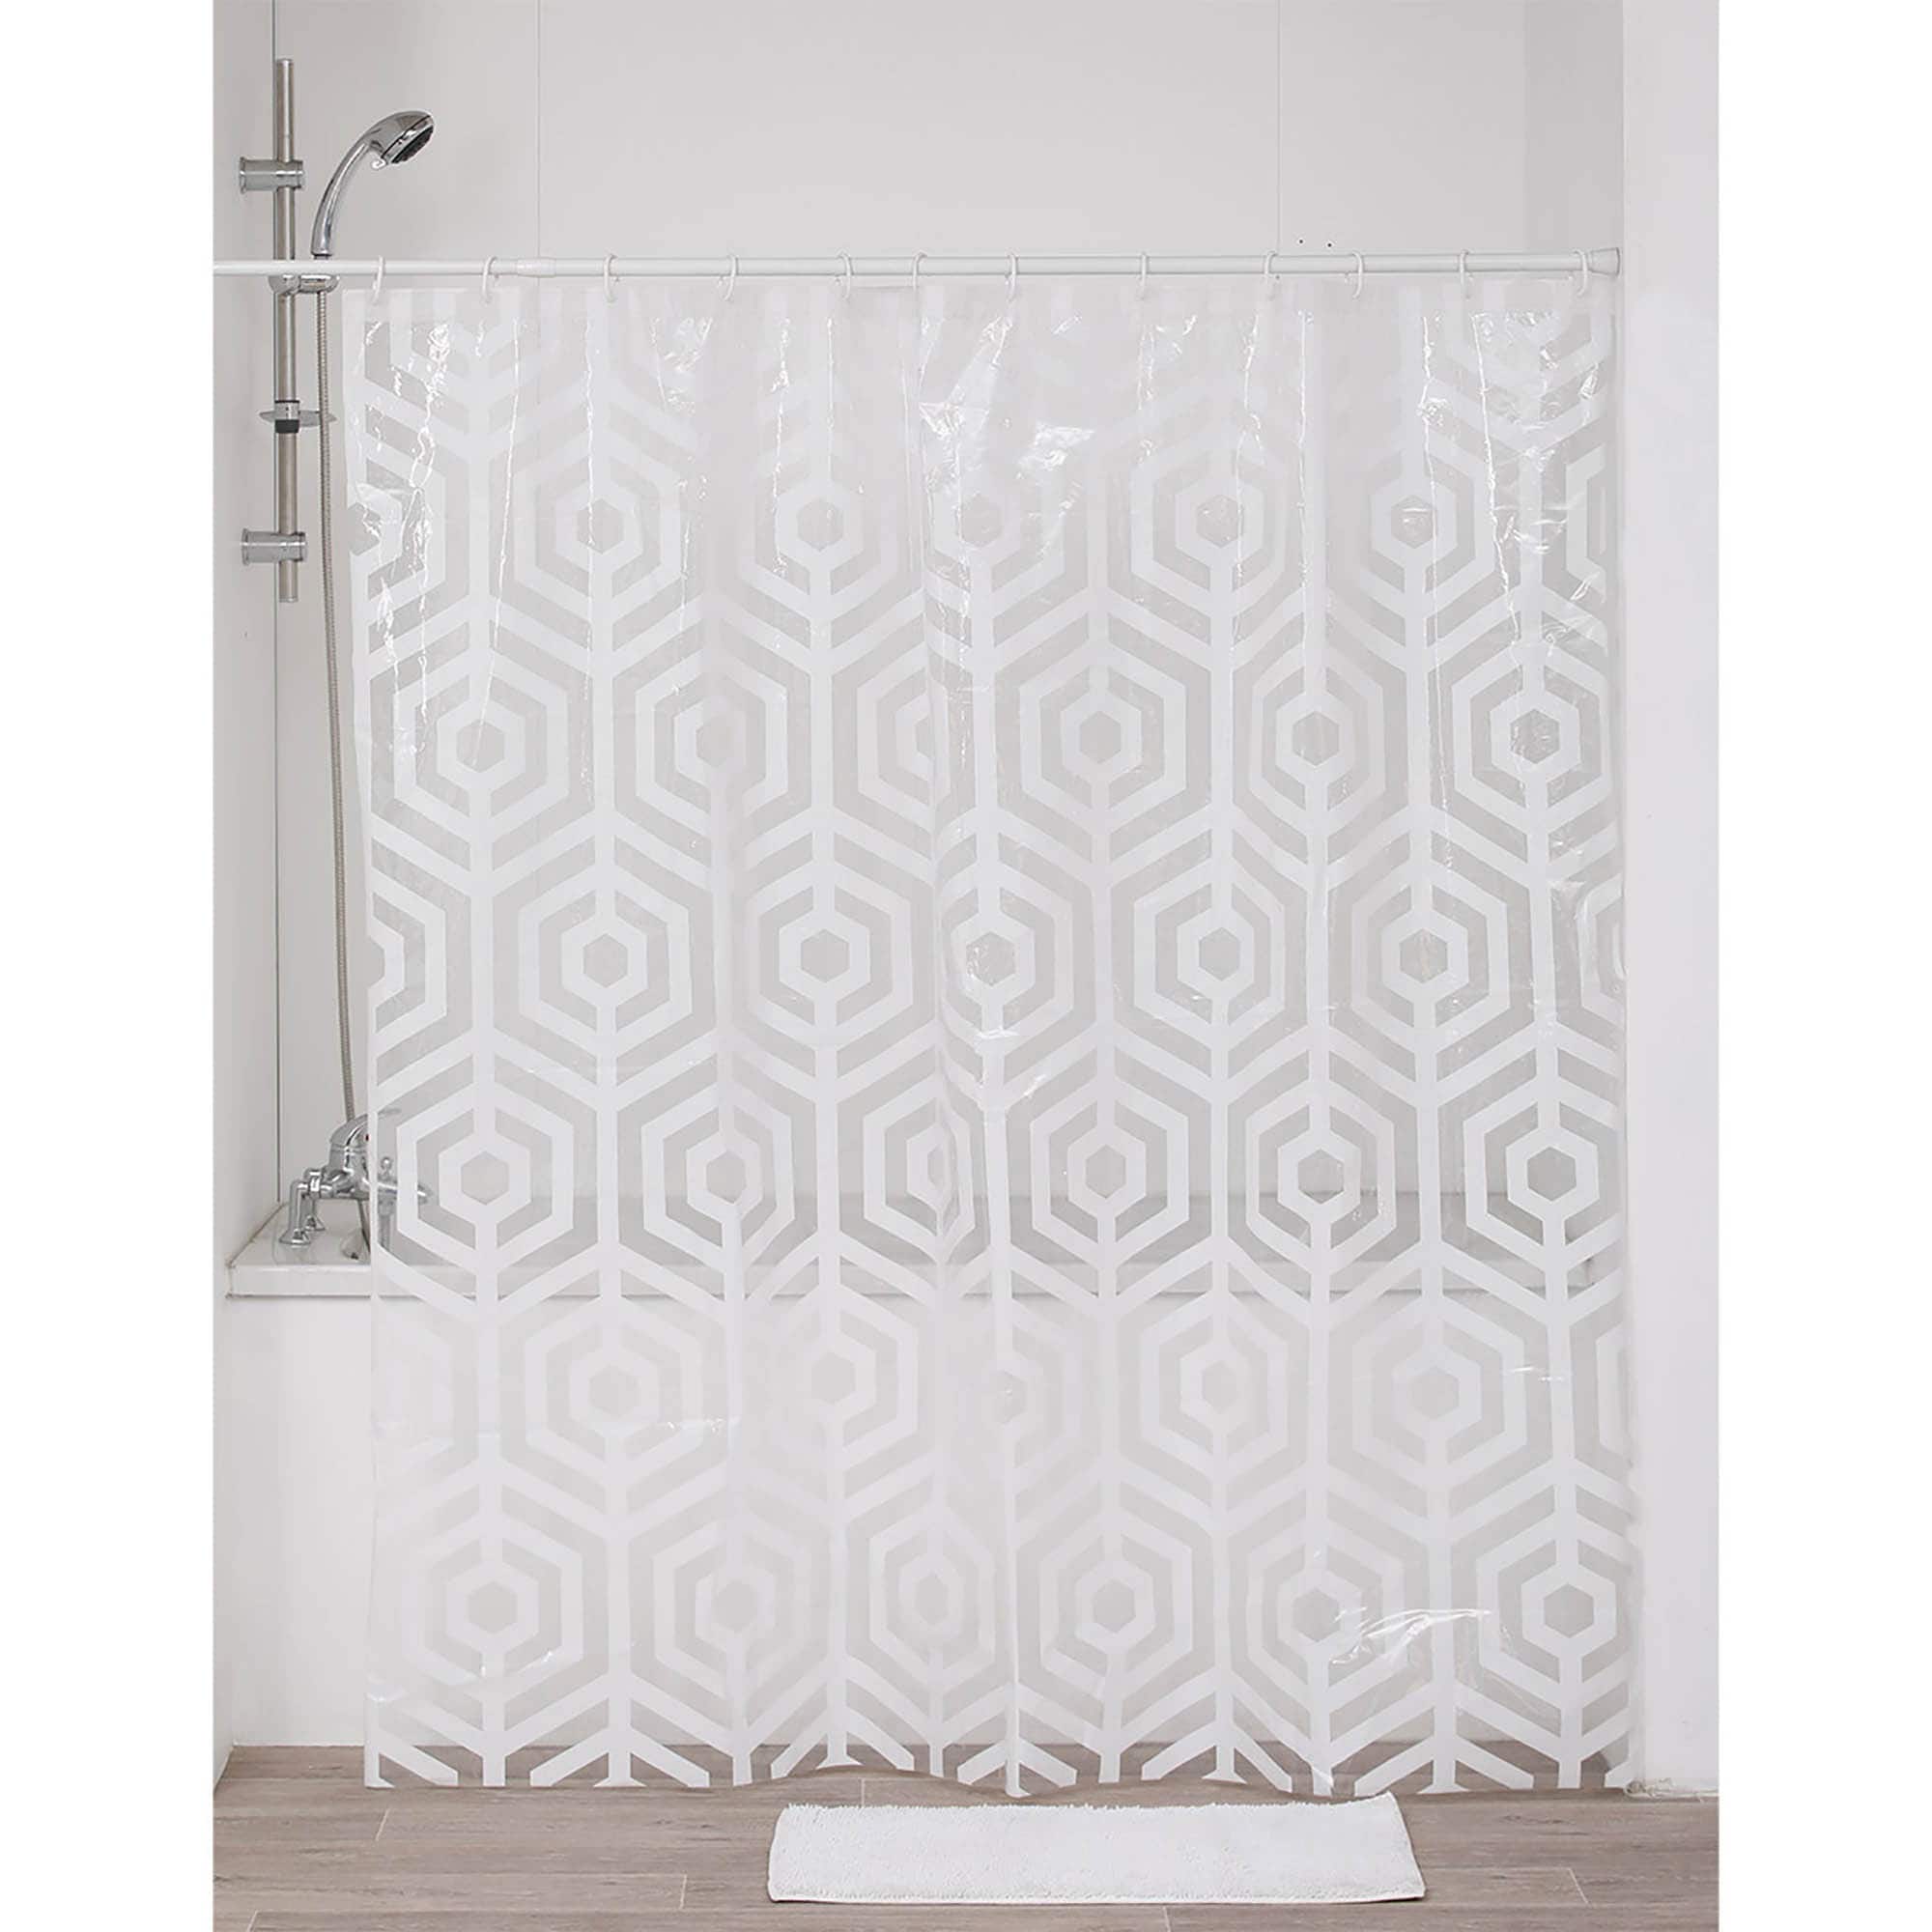 clear PEVA shower curtain with white hexagon motif